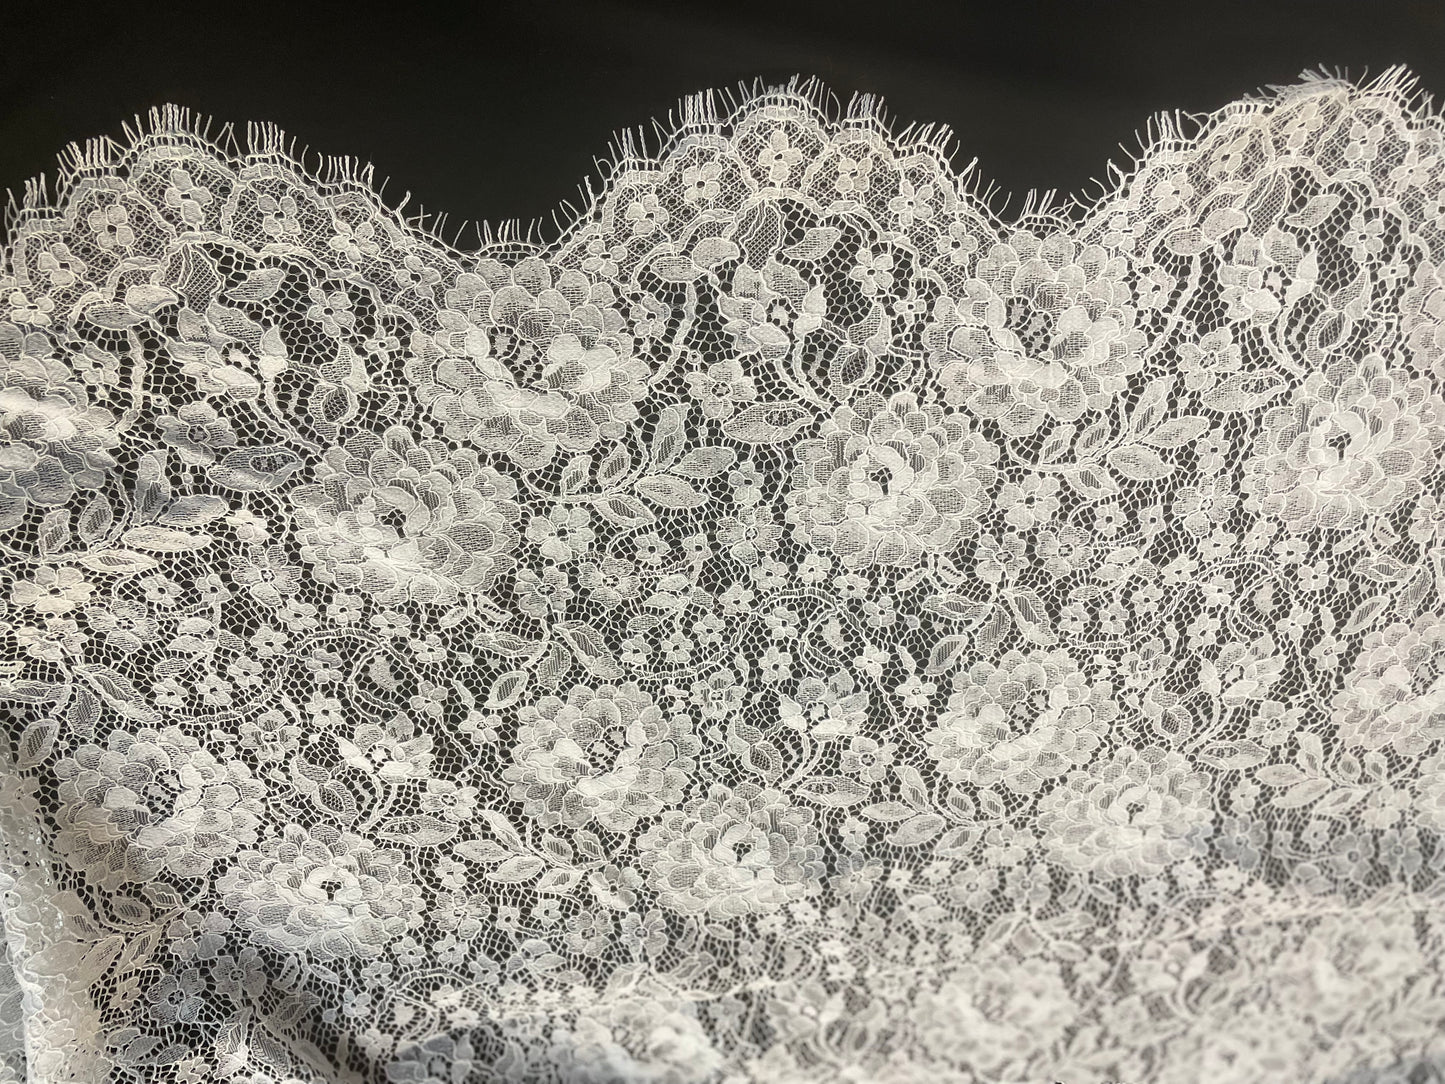 Ivory Floral Bridal Lace - White